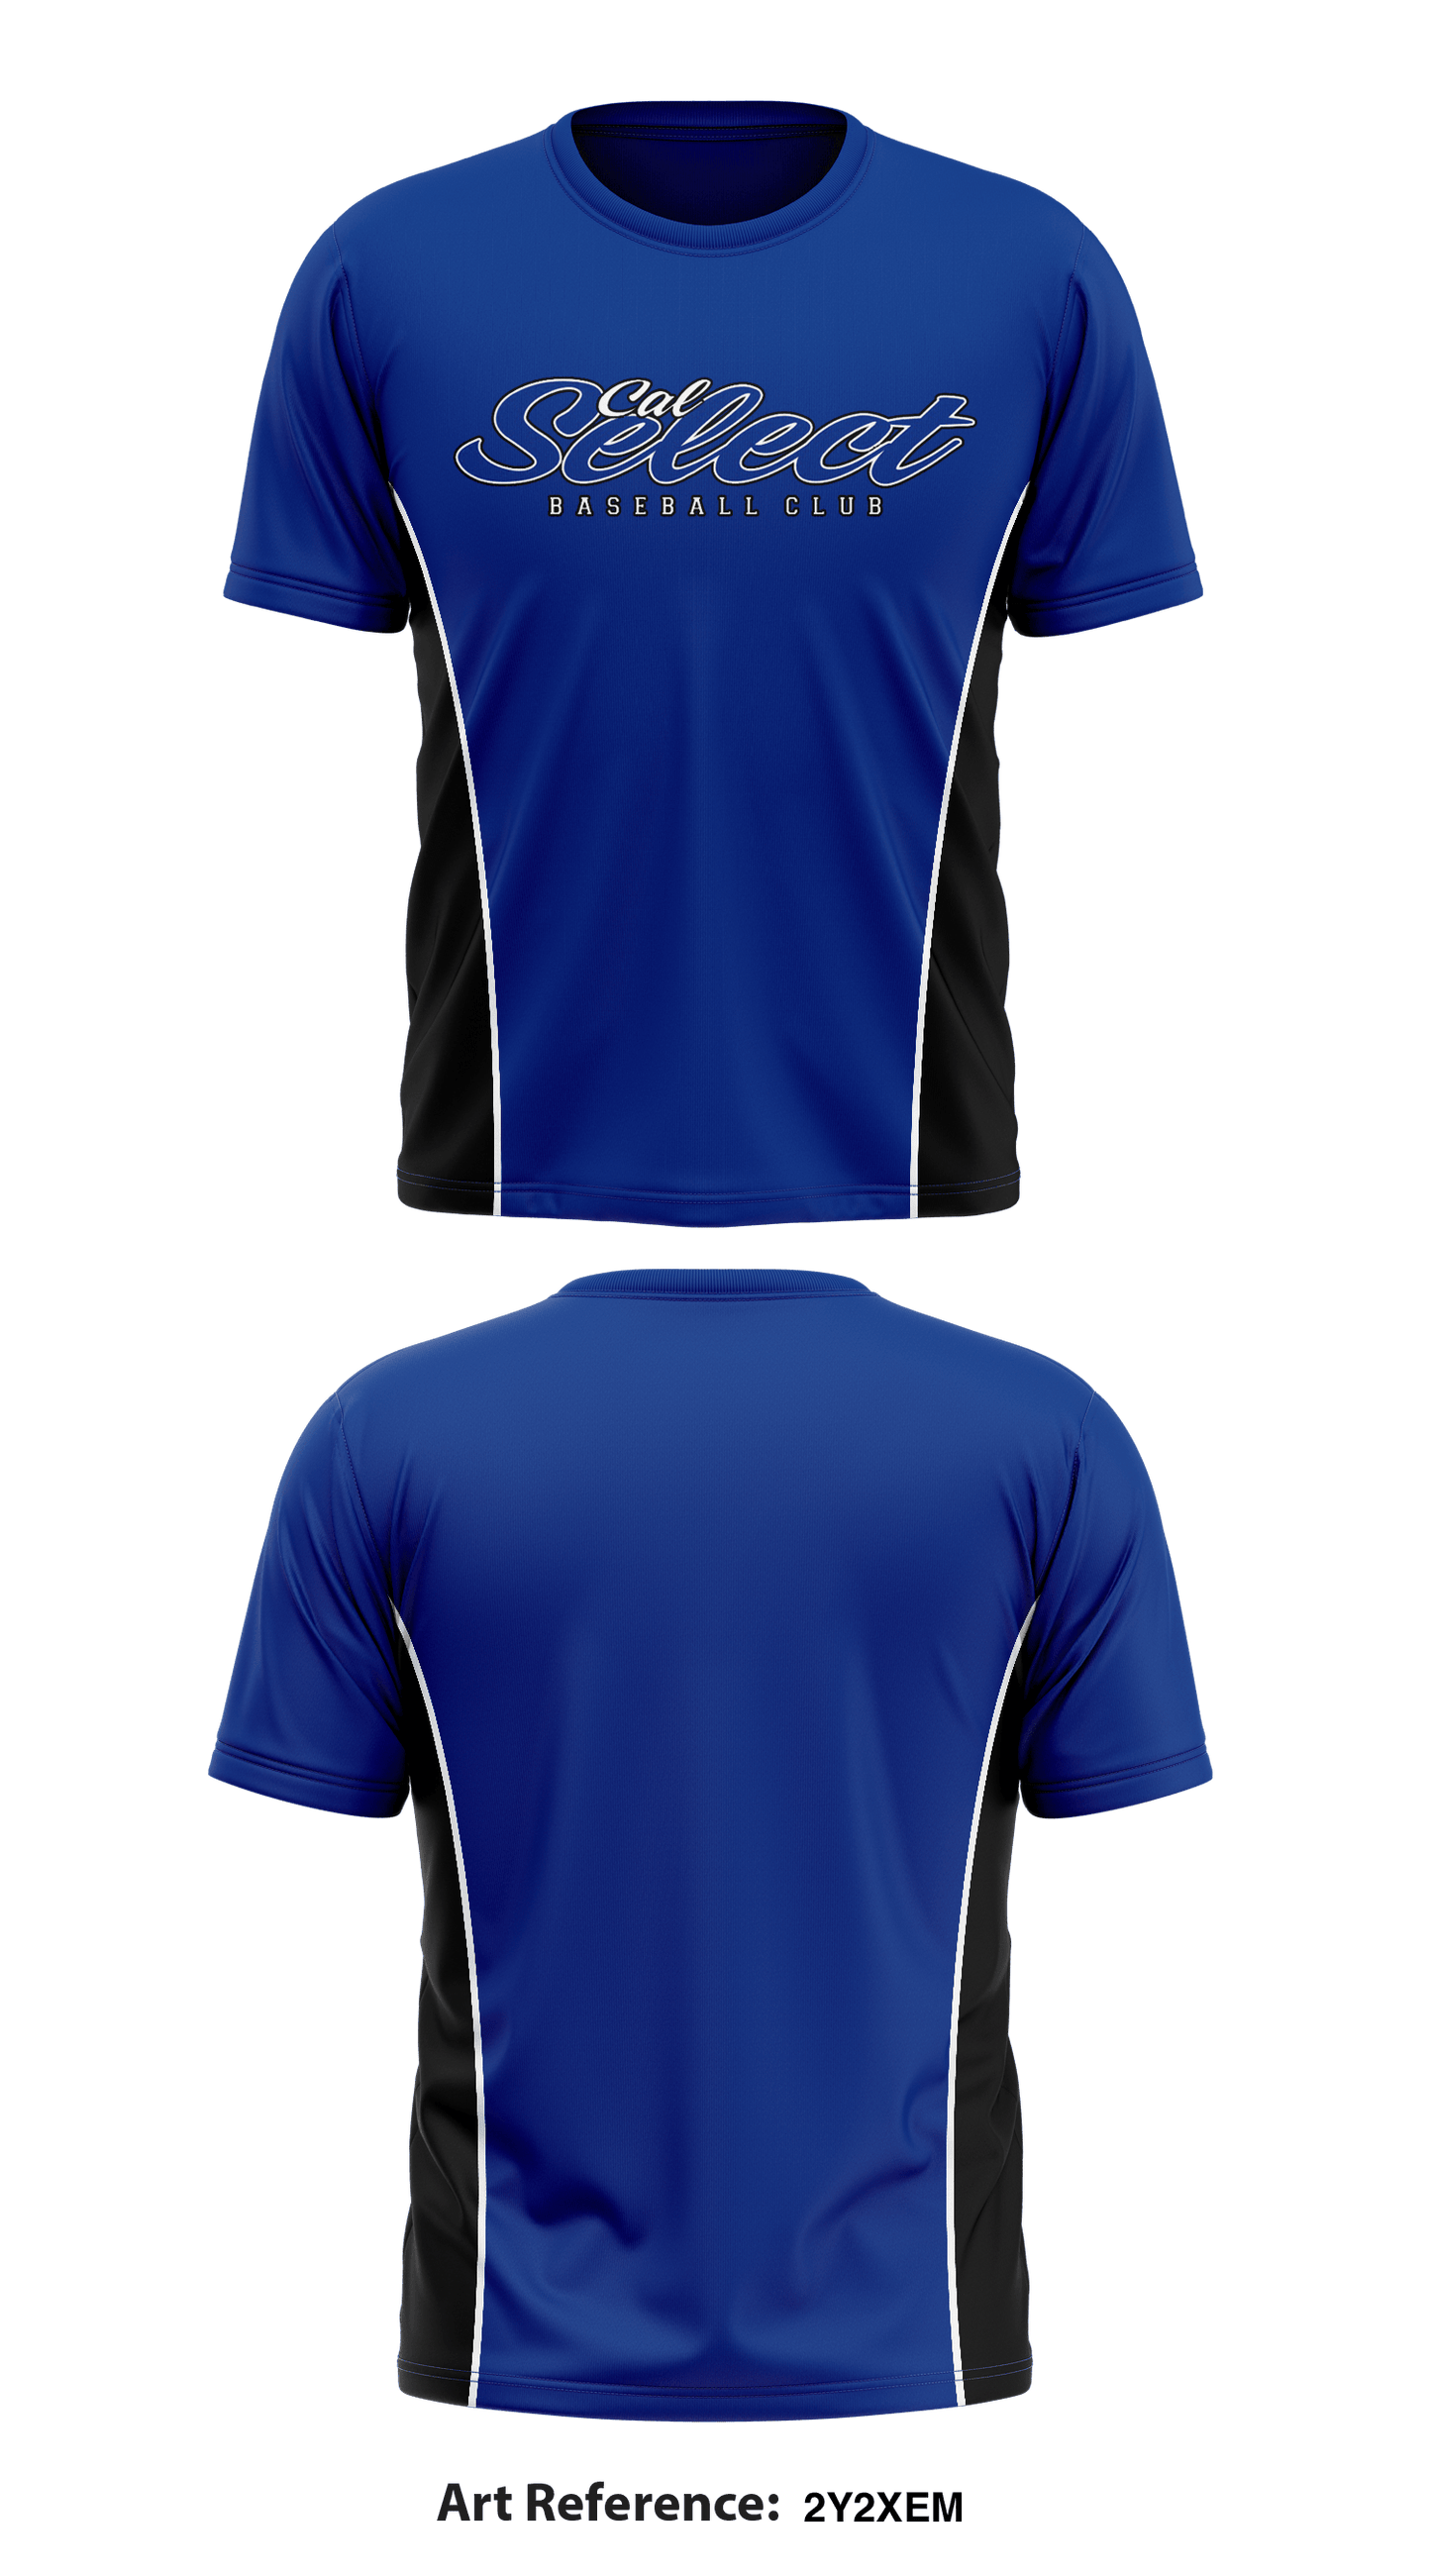 Cal Select Core Men's SS Performance Tee - 2Y2XEm